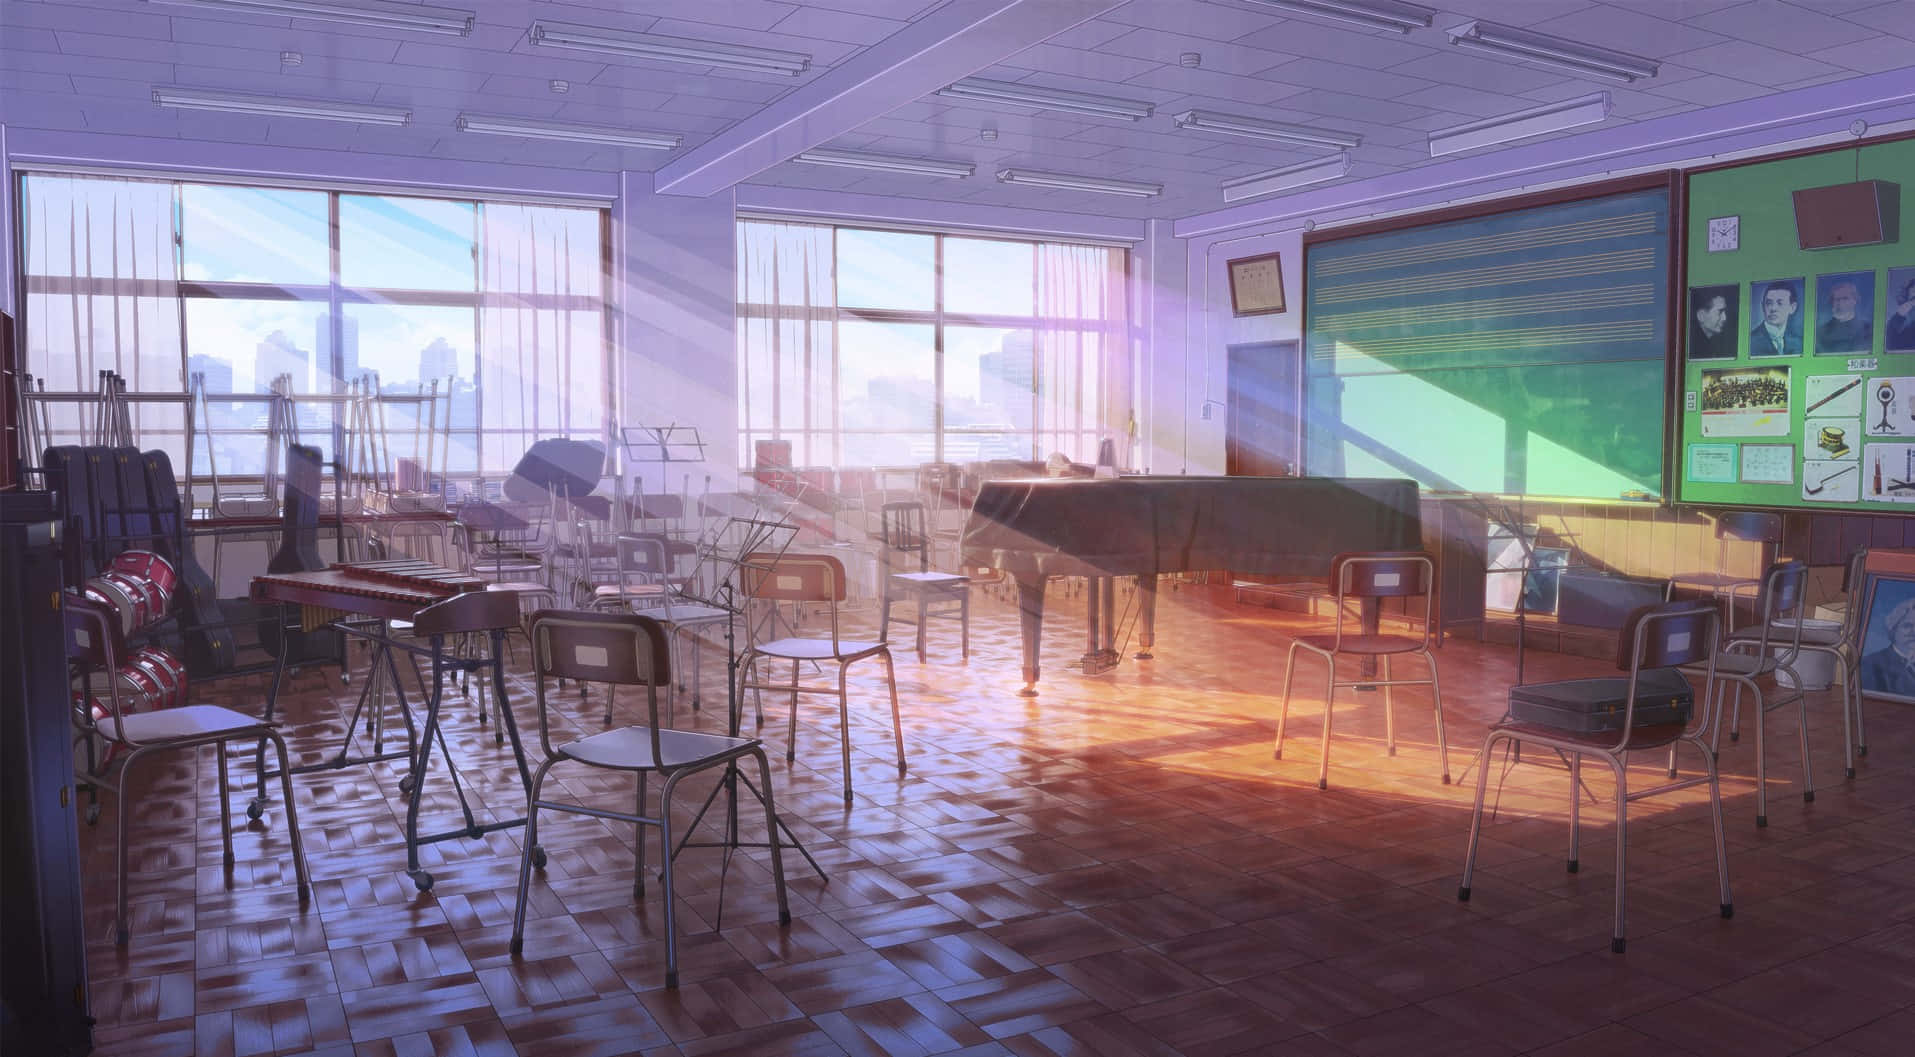 A Classroom With Chairs And A Piano